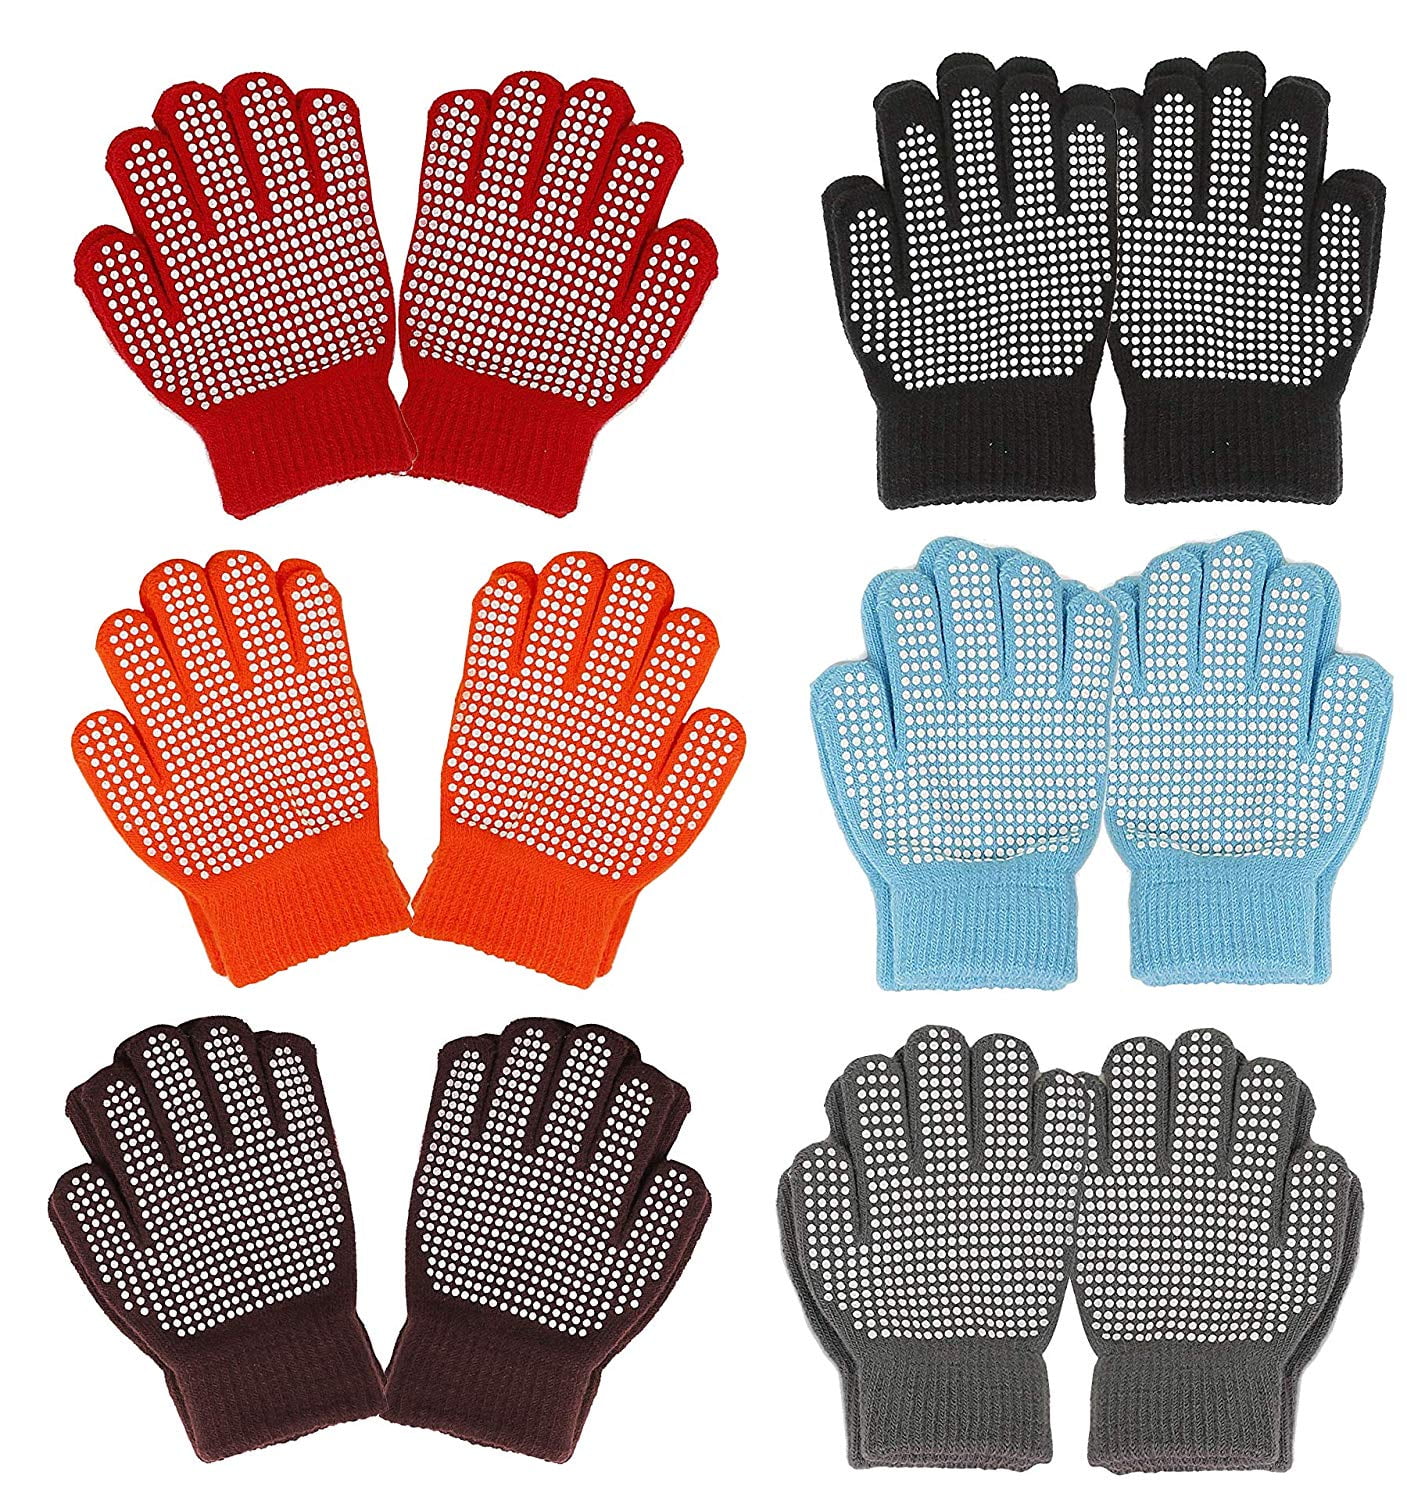 Cooraby 16 Pairs Toddler Gloves Magic Stretch Winter Mittens Soft Warm Unisex Baby Knitted Gloves 